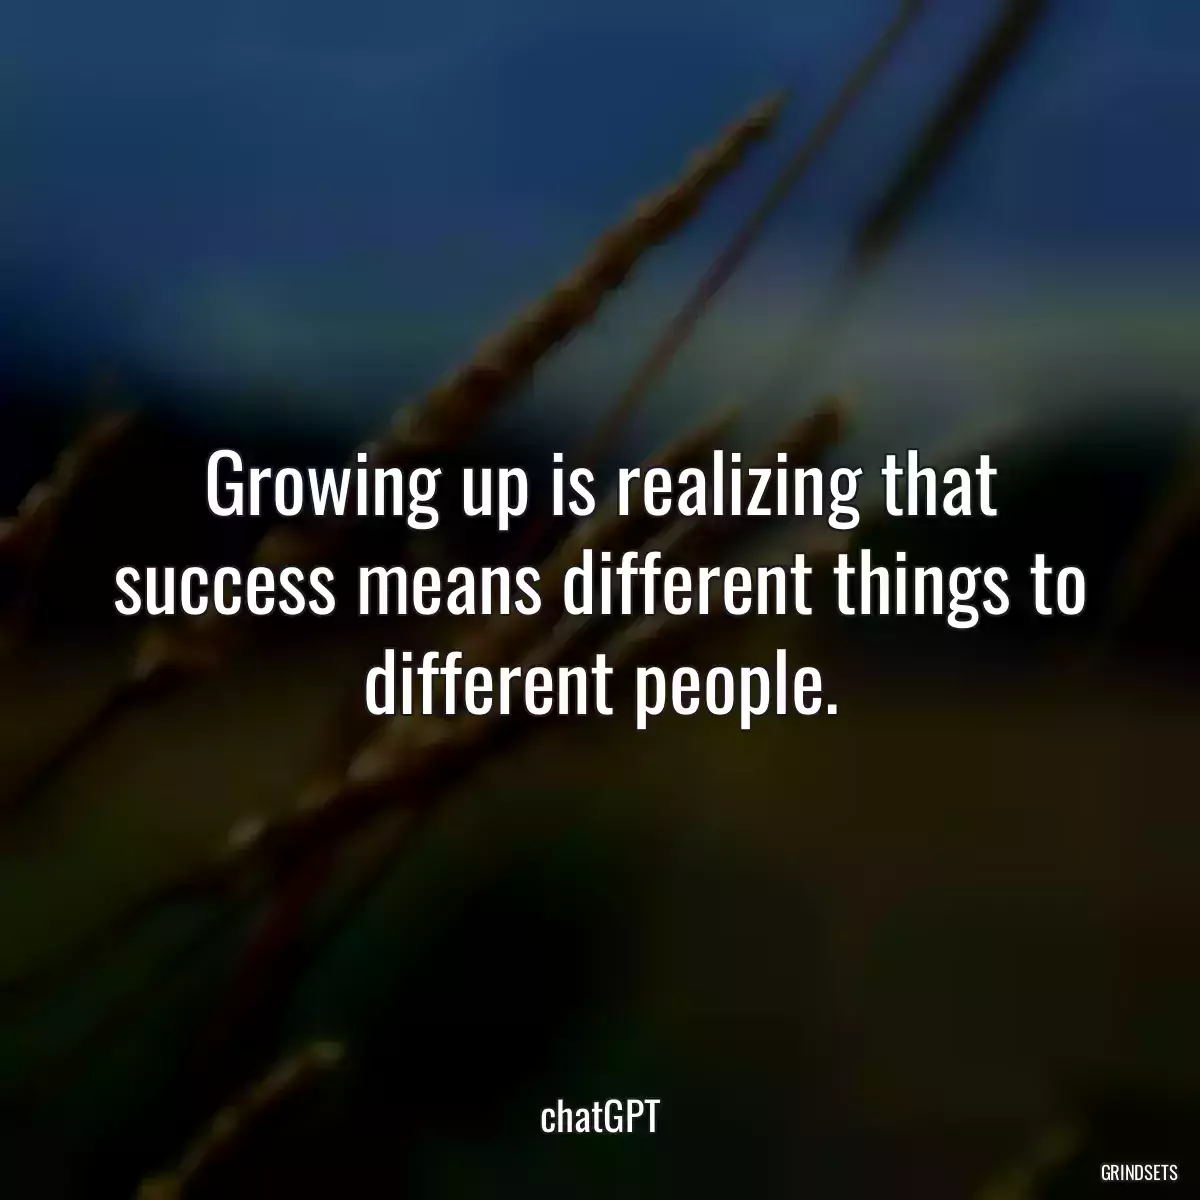 Growing up is realizing that success means different things to different people.